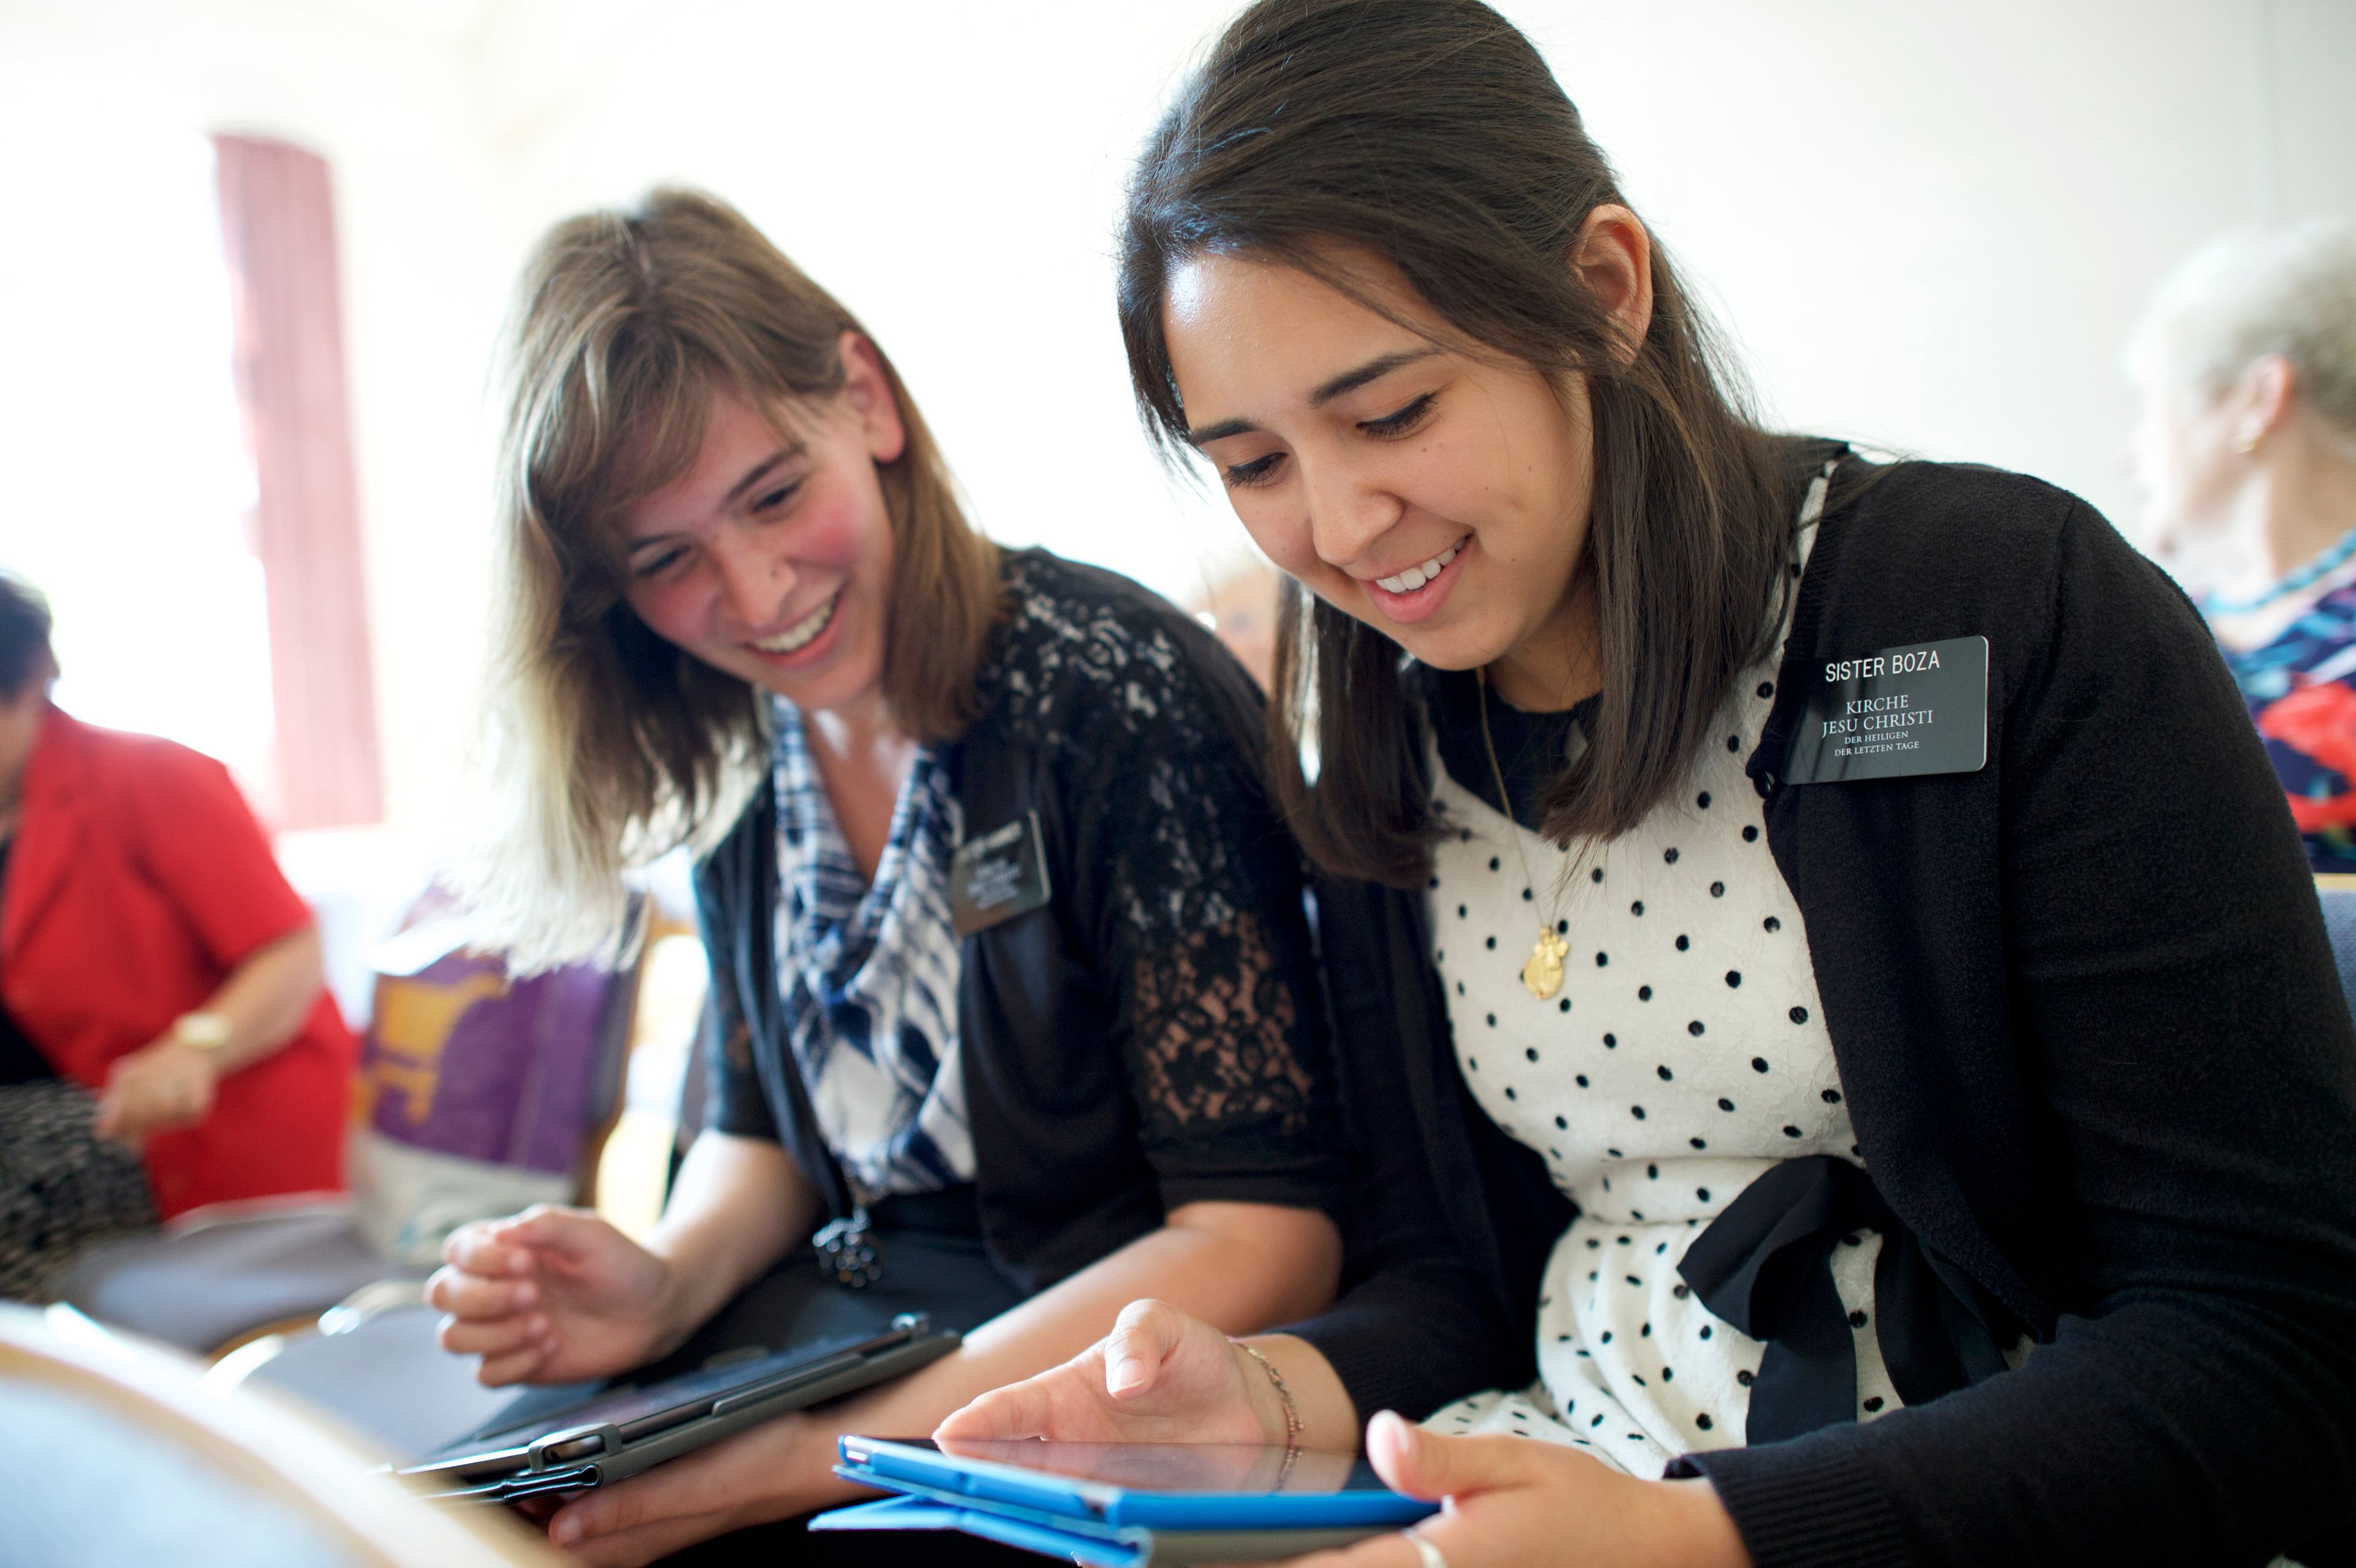 Two sister missionaries in Germany sit and study together on their tablets.